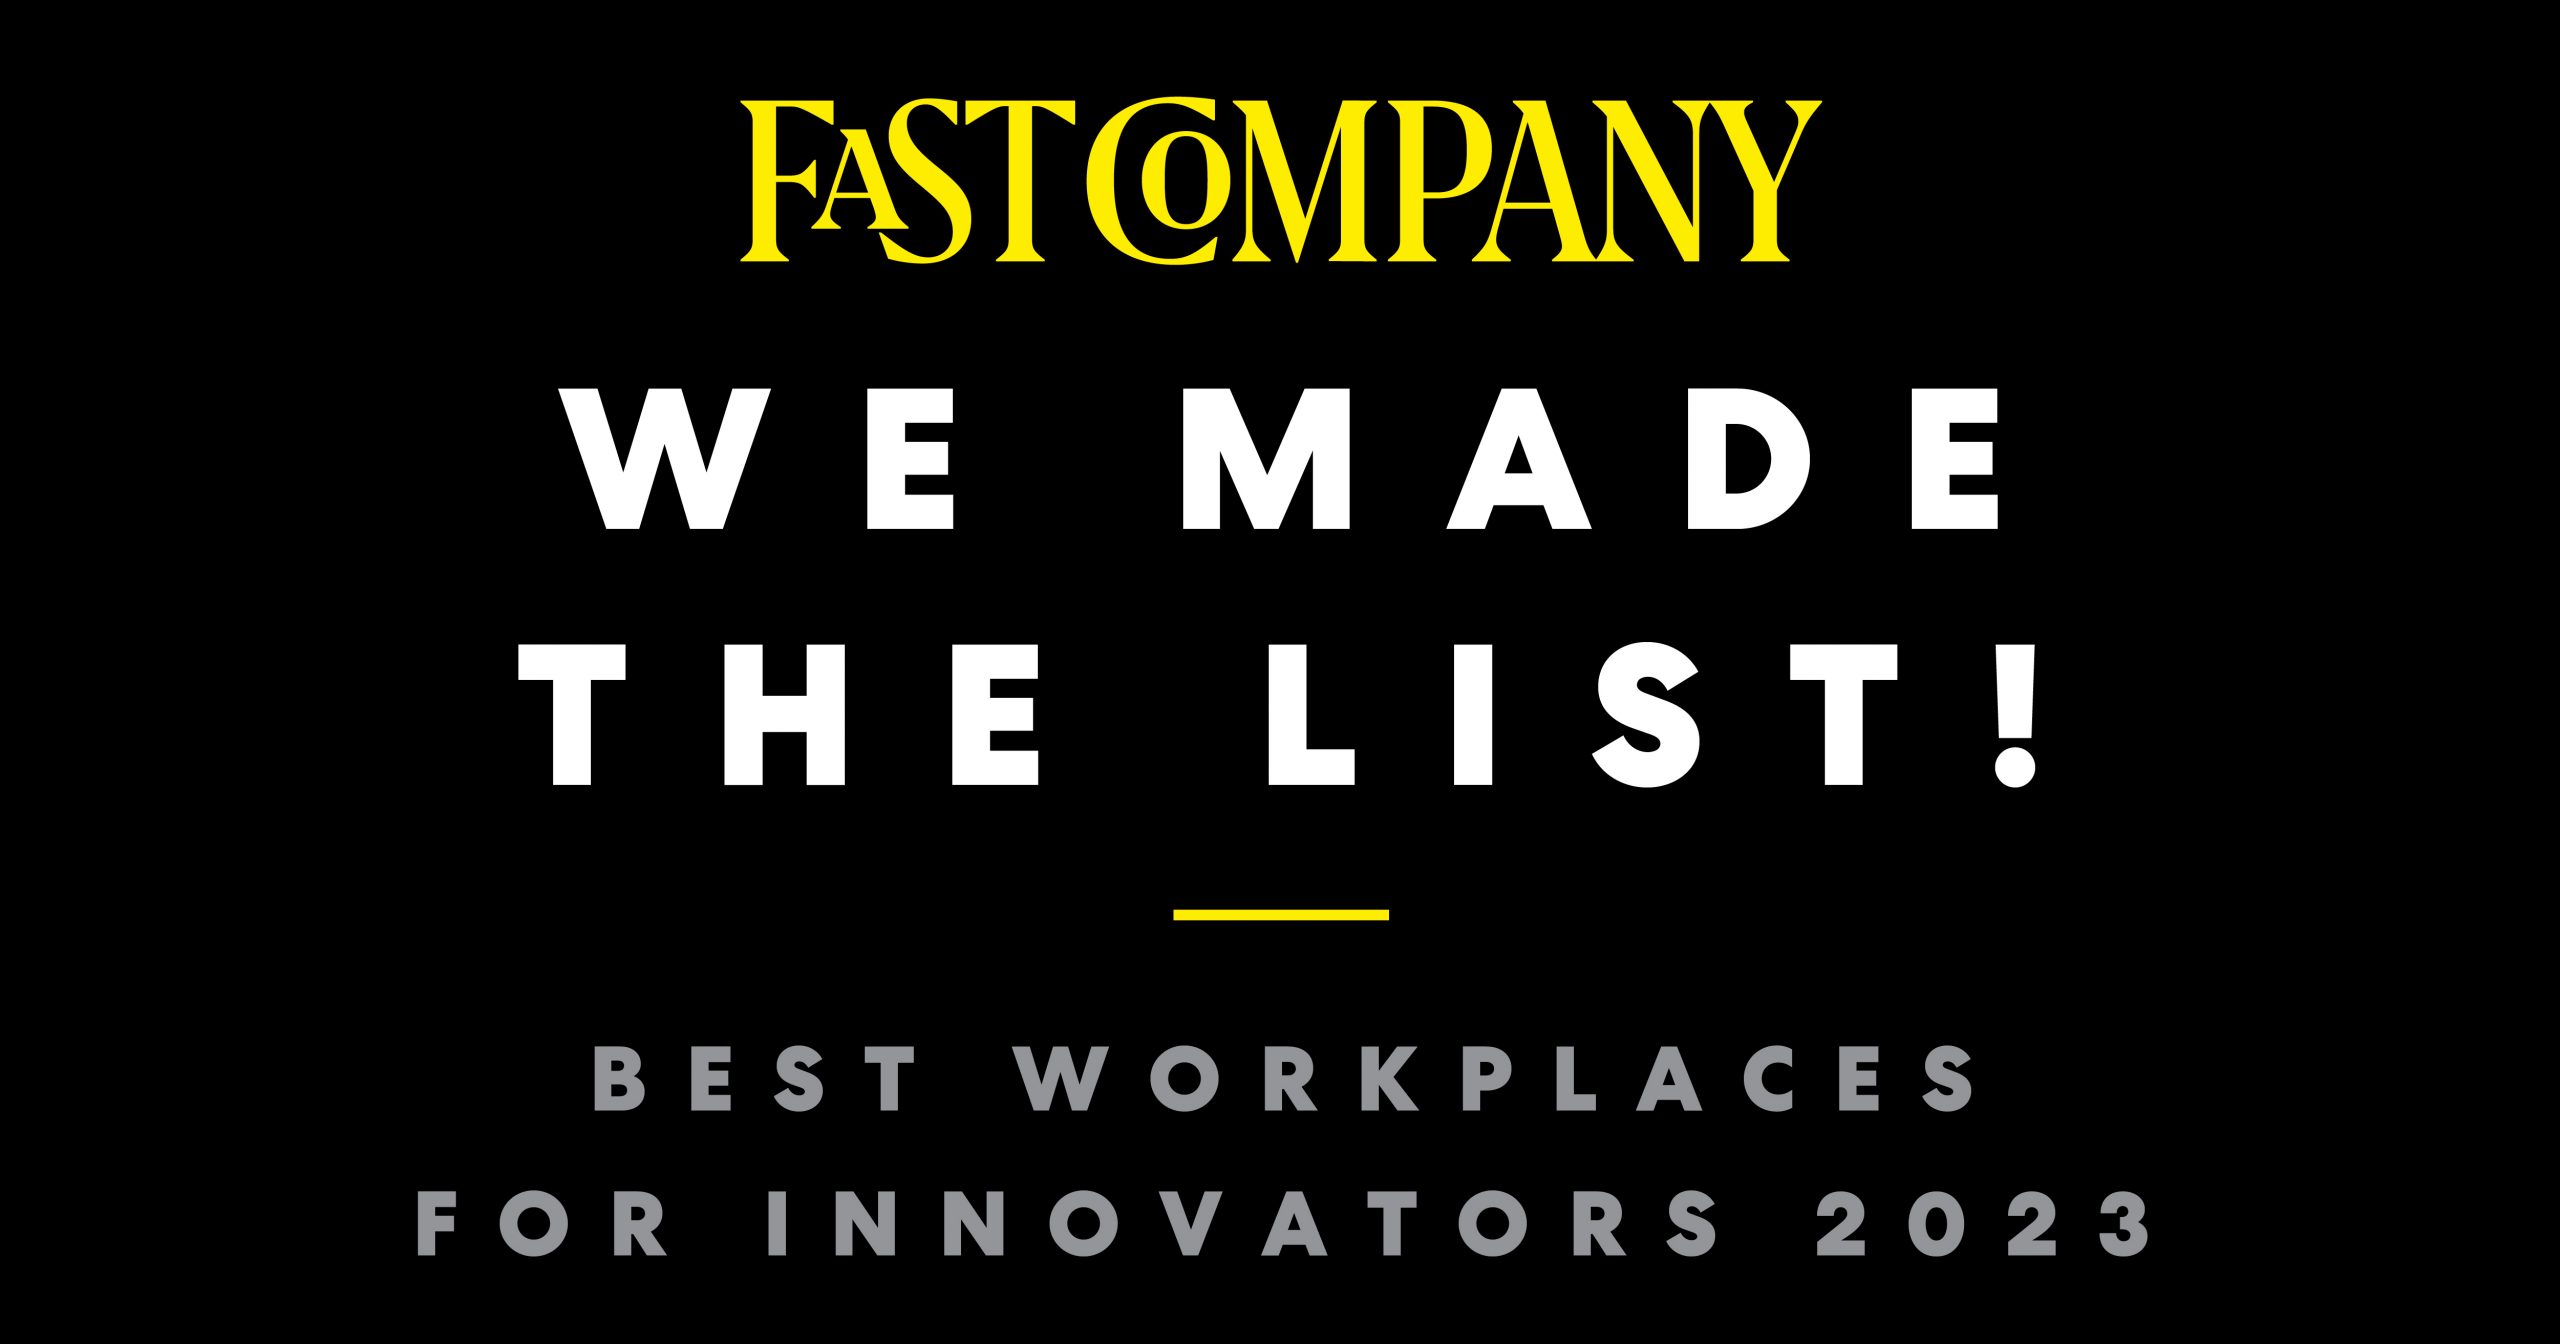 Fast Company Best Workplaces for Innovators 2023 logo